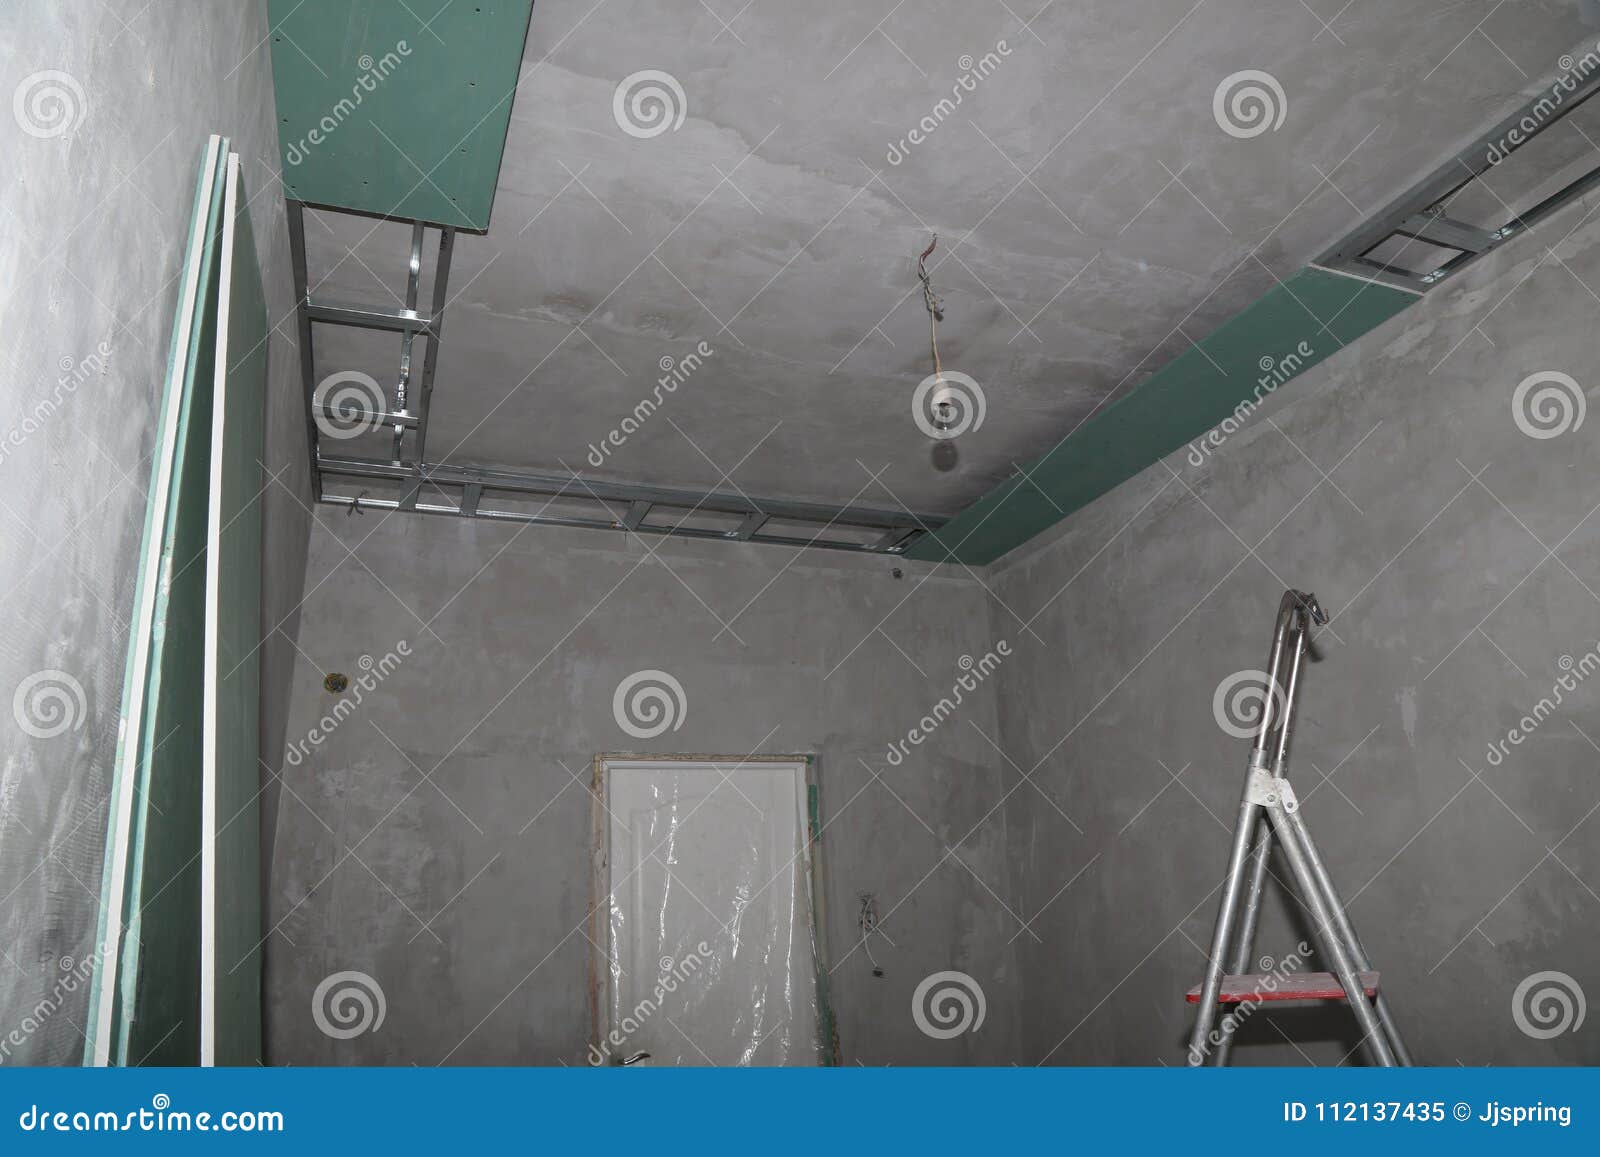 Fixing Plaster Boards At The Ceiling During Construction Stock